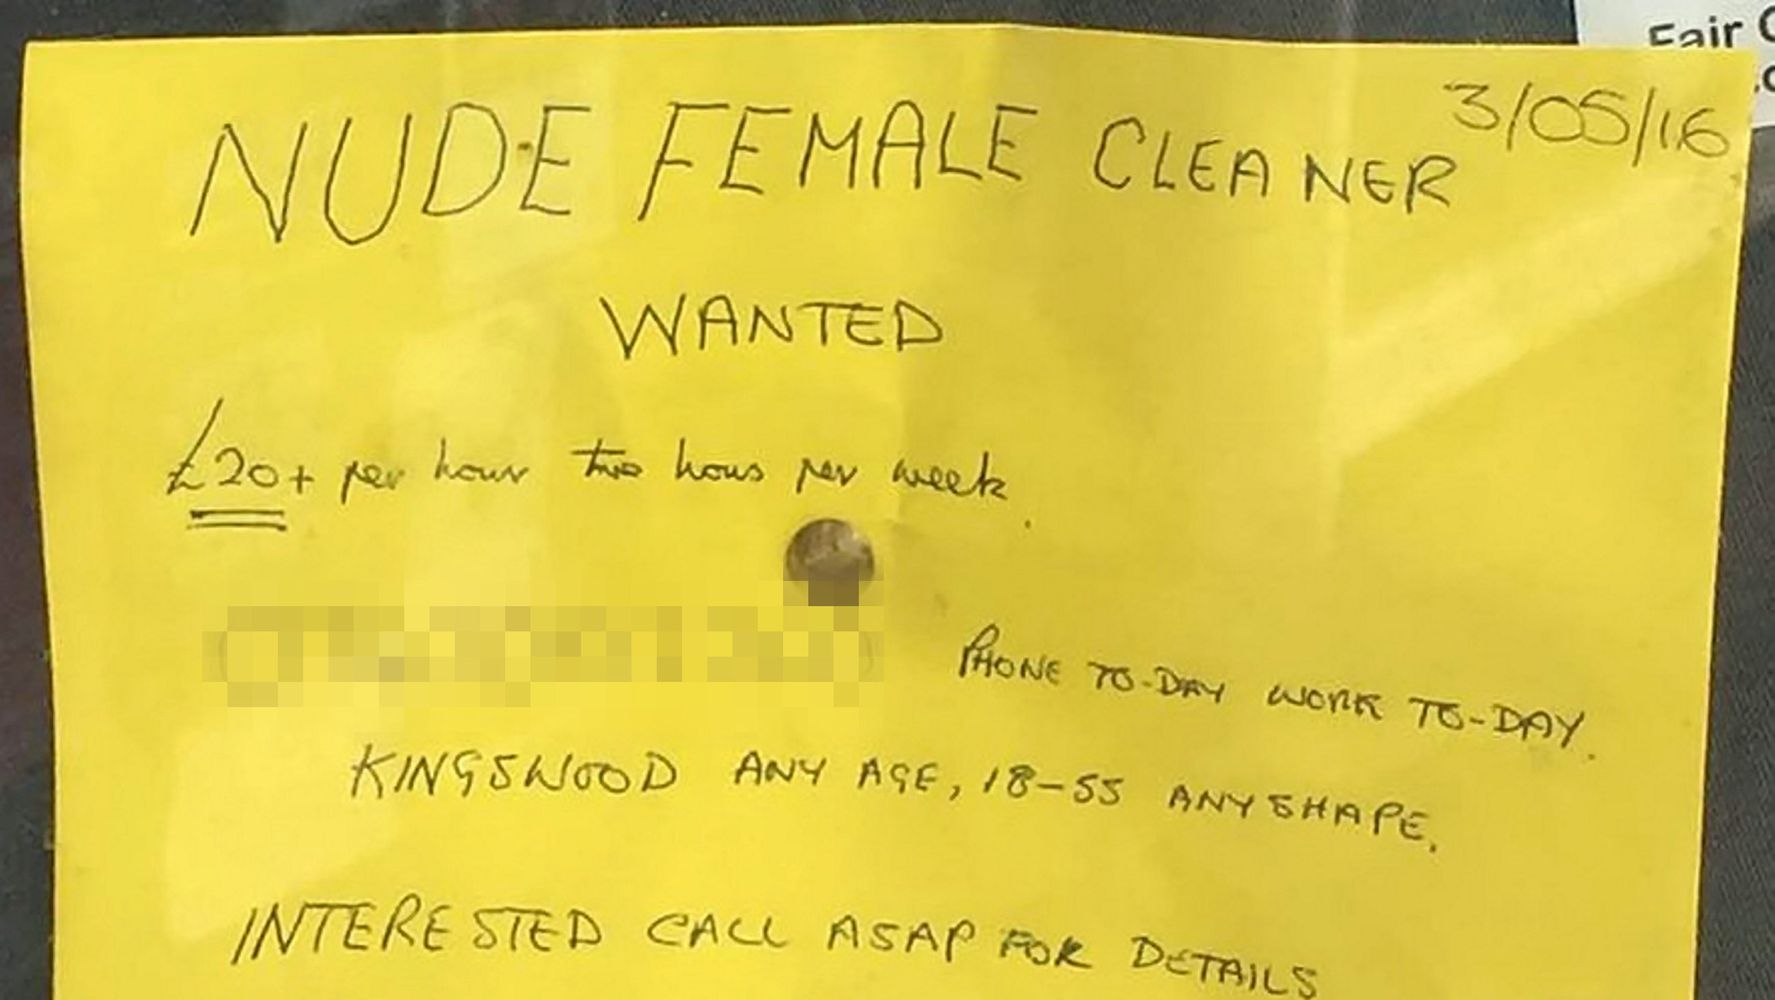 Voyeur Nudist Topless - Naked Cleaner Ad In Newsagent's Window Yields Eight Applications For  70-Year-Old 'Voyeur' | HuffPost UK Comedy